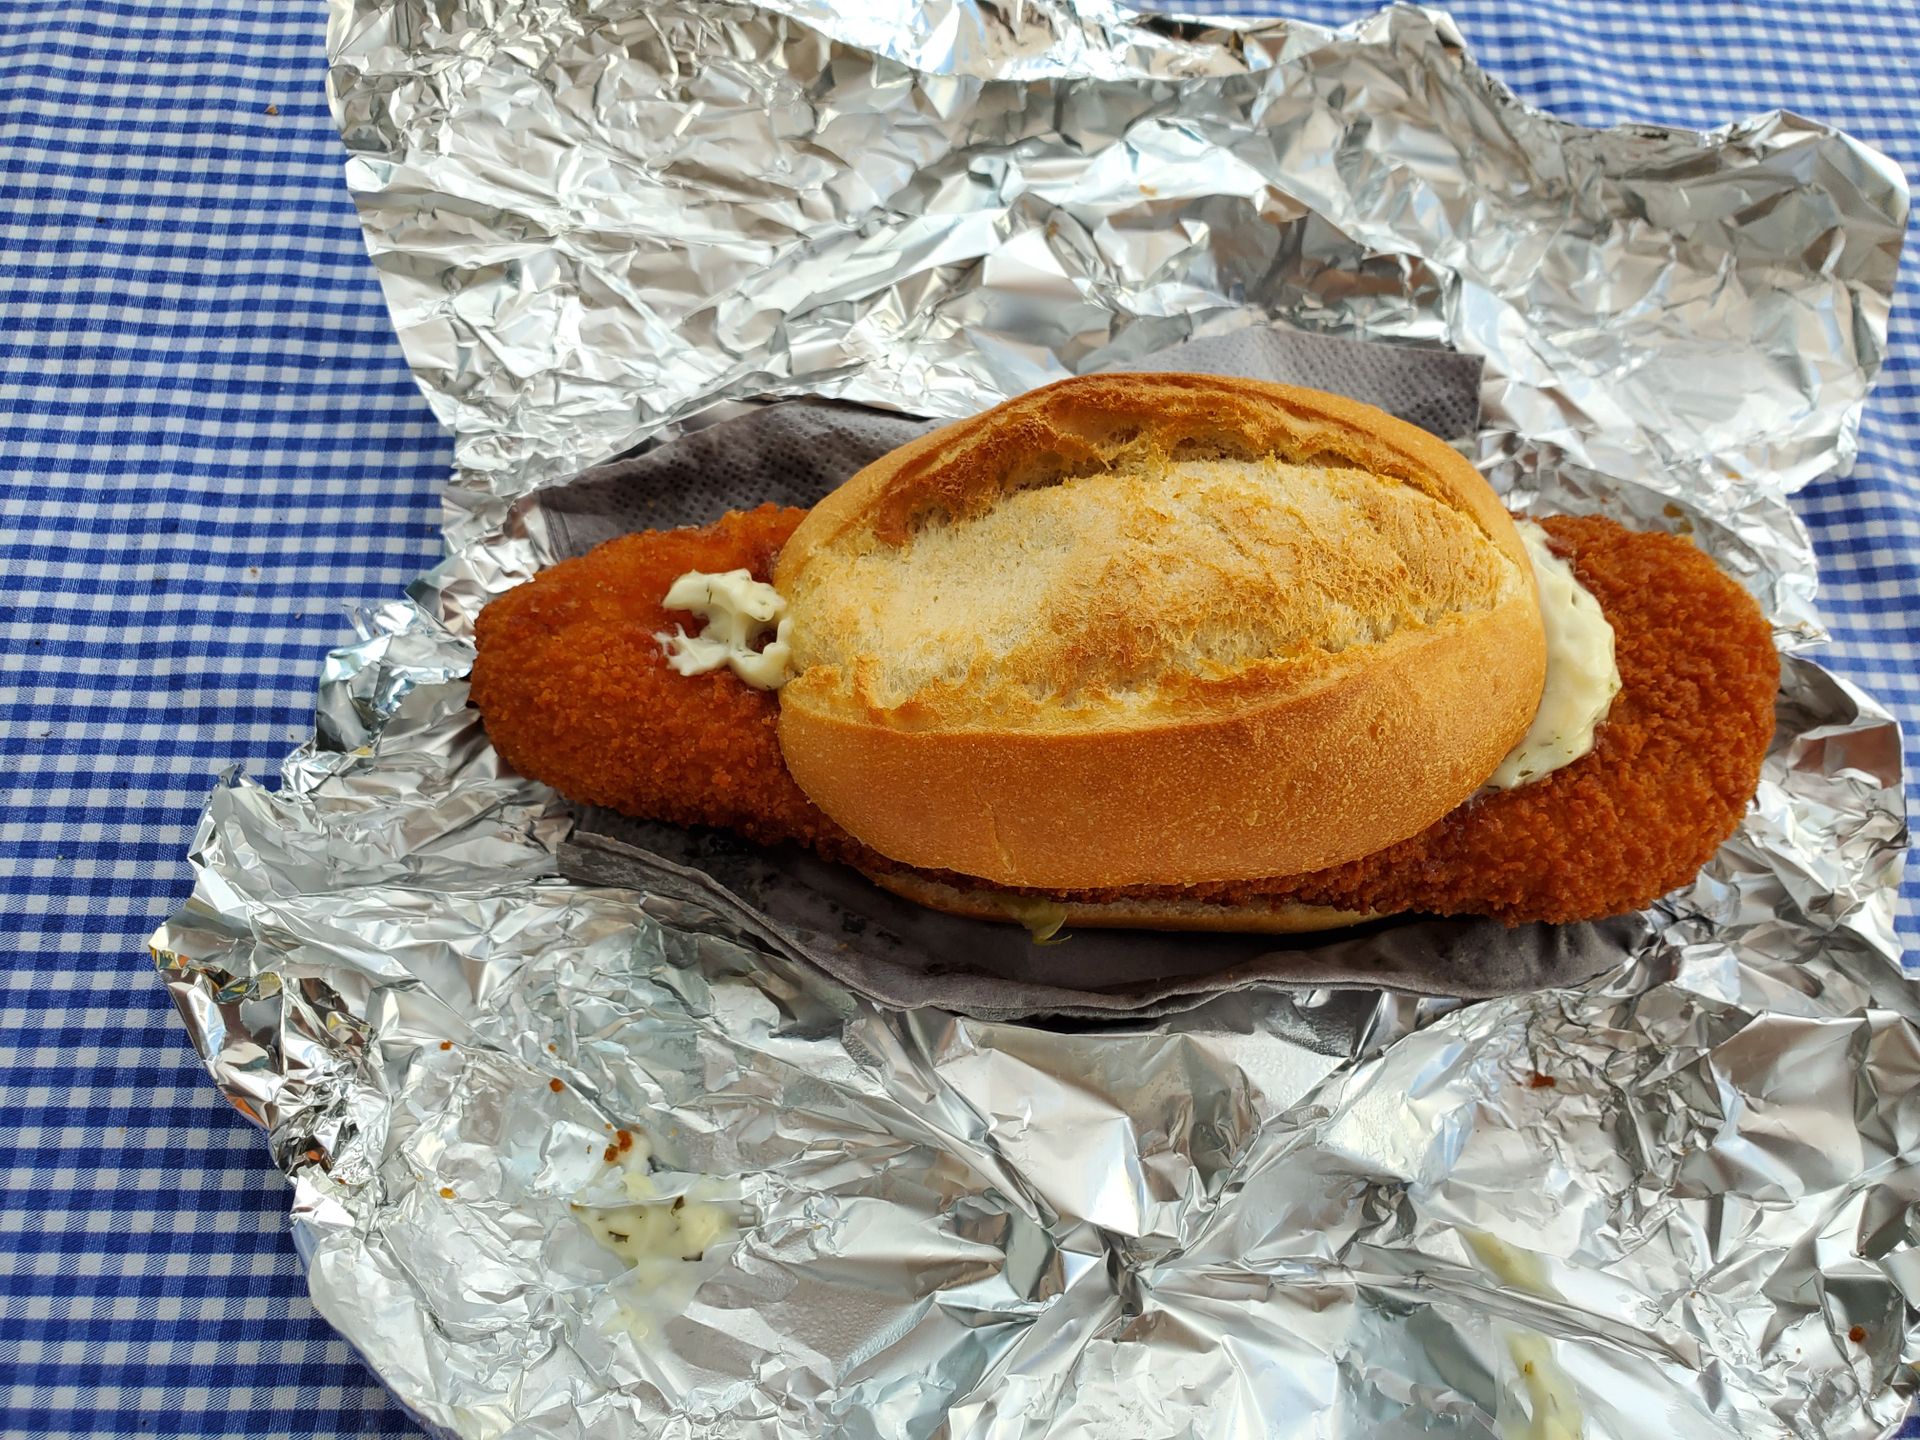 After the hike, a warm fried fish sandwich. Delicious.